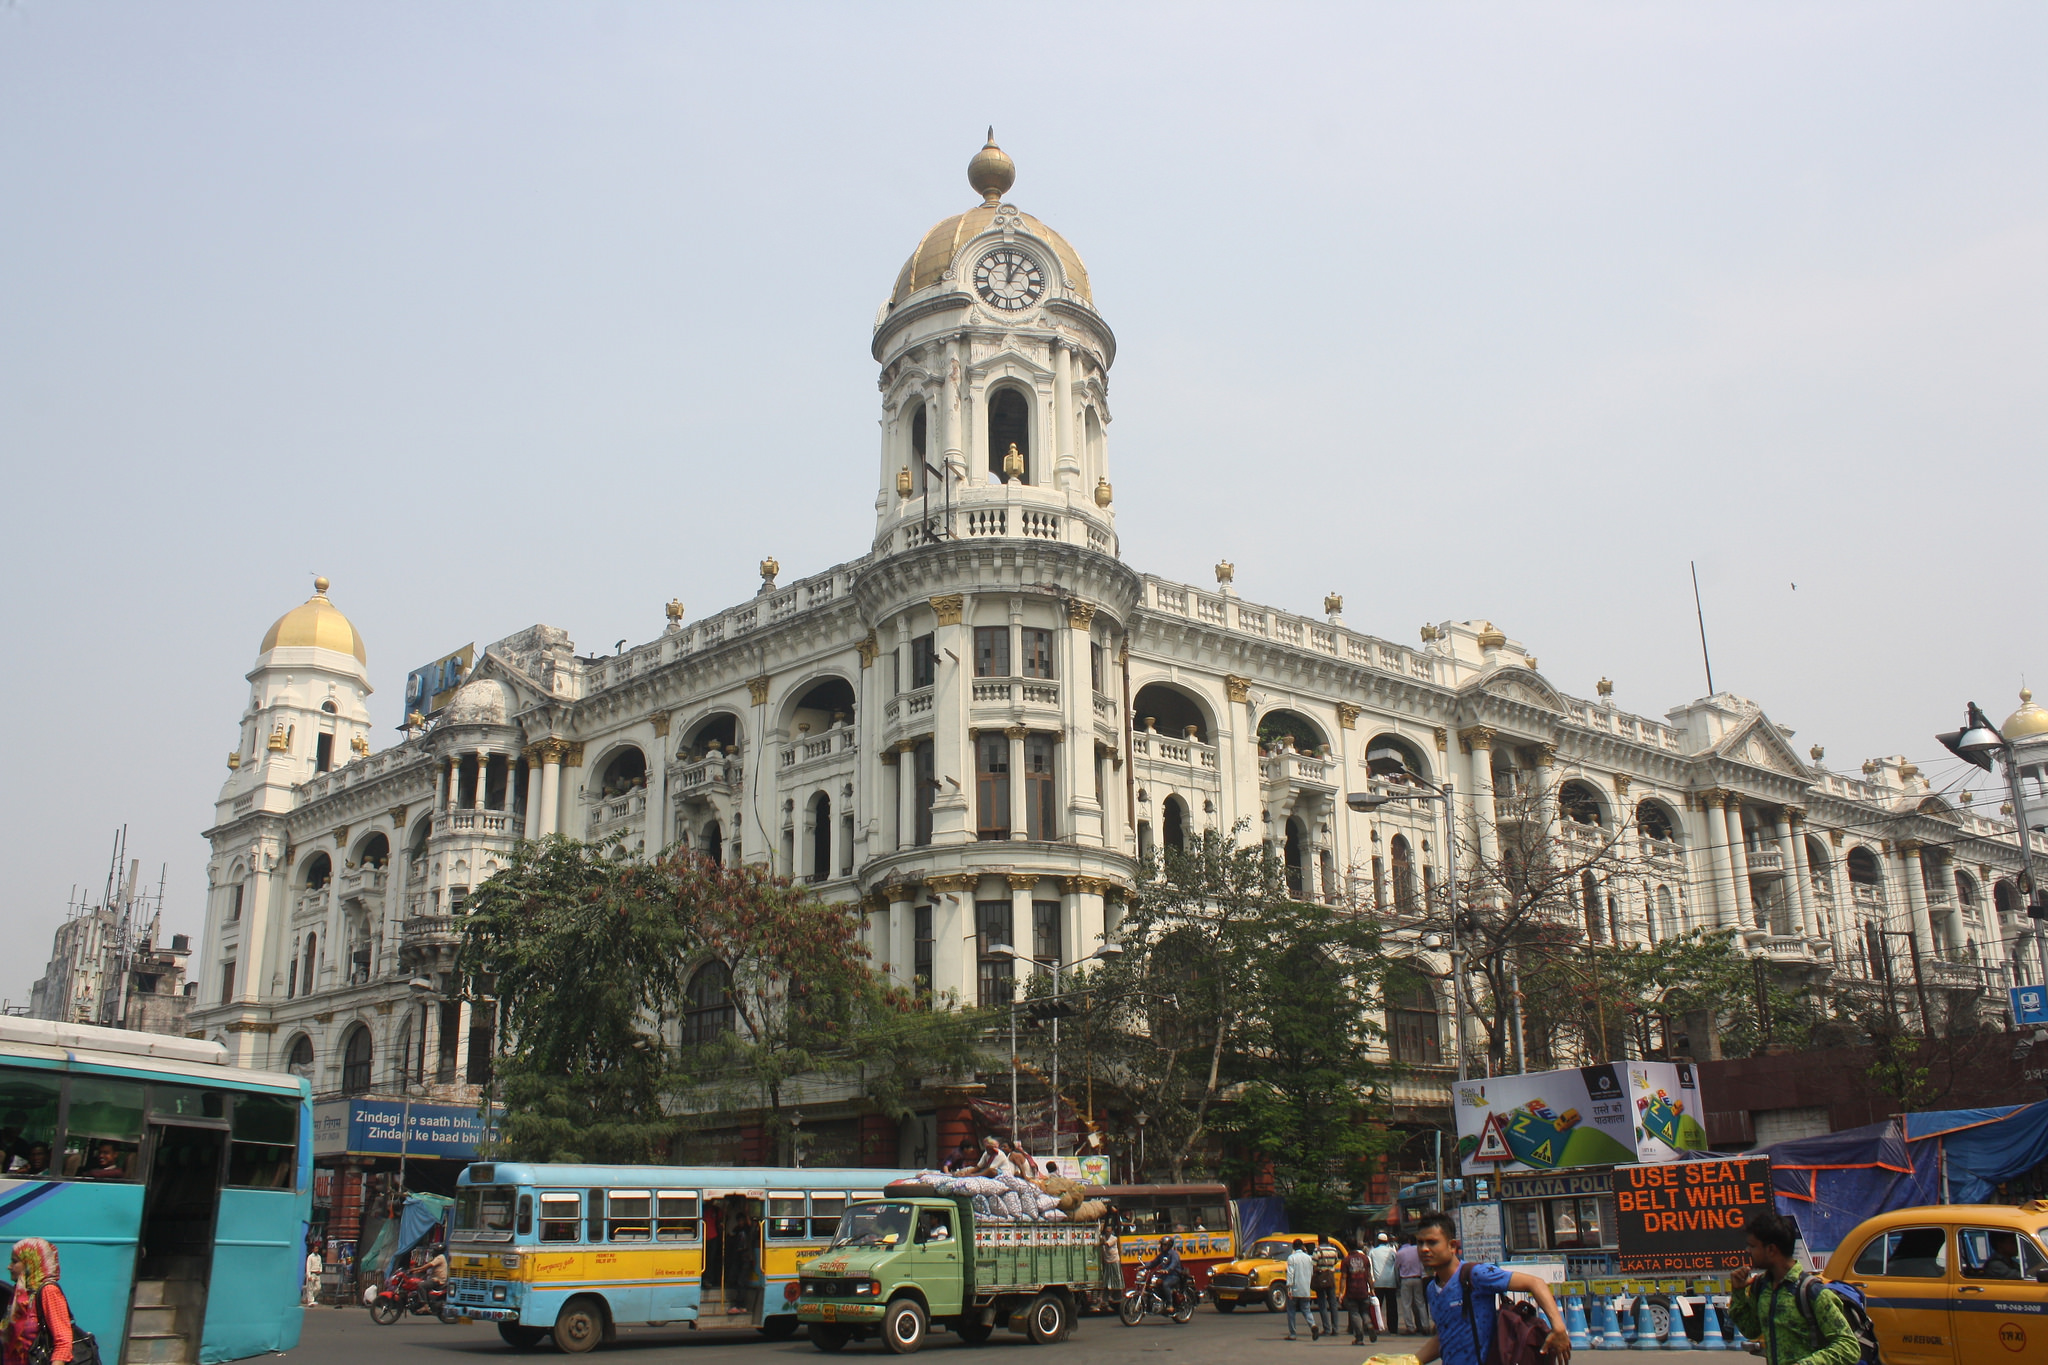 Russians tend to enjoy the contrasts in Indian cities like Kolkata. 